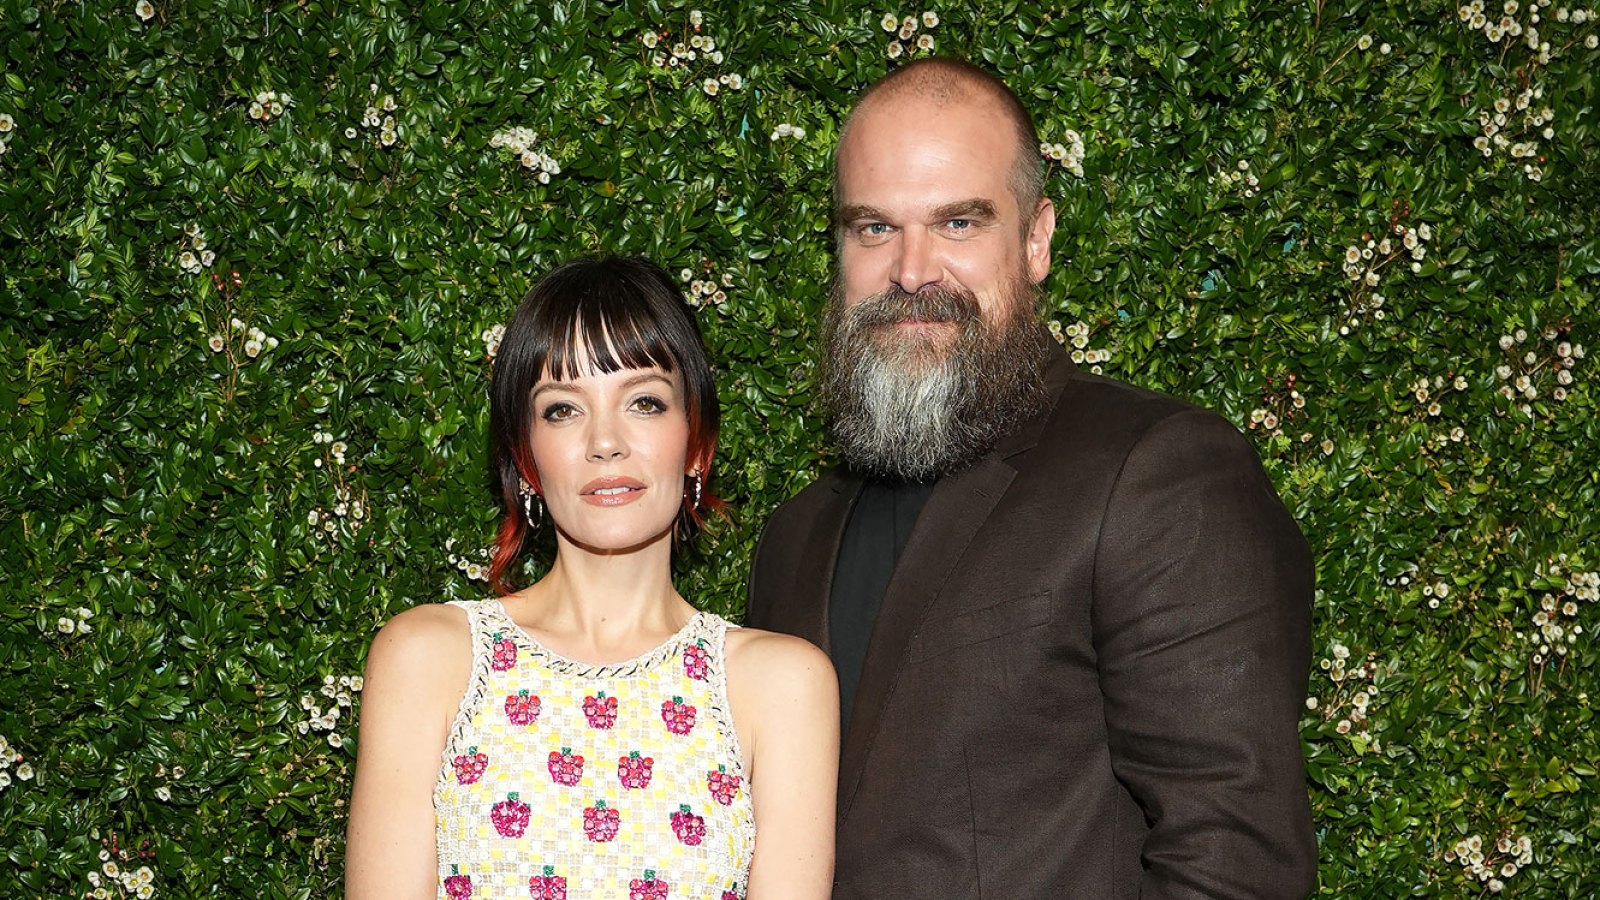 Lily Allen Says She Sometimes Turns Down David Harbour NSFW Requests